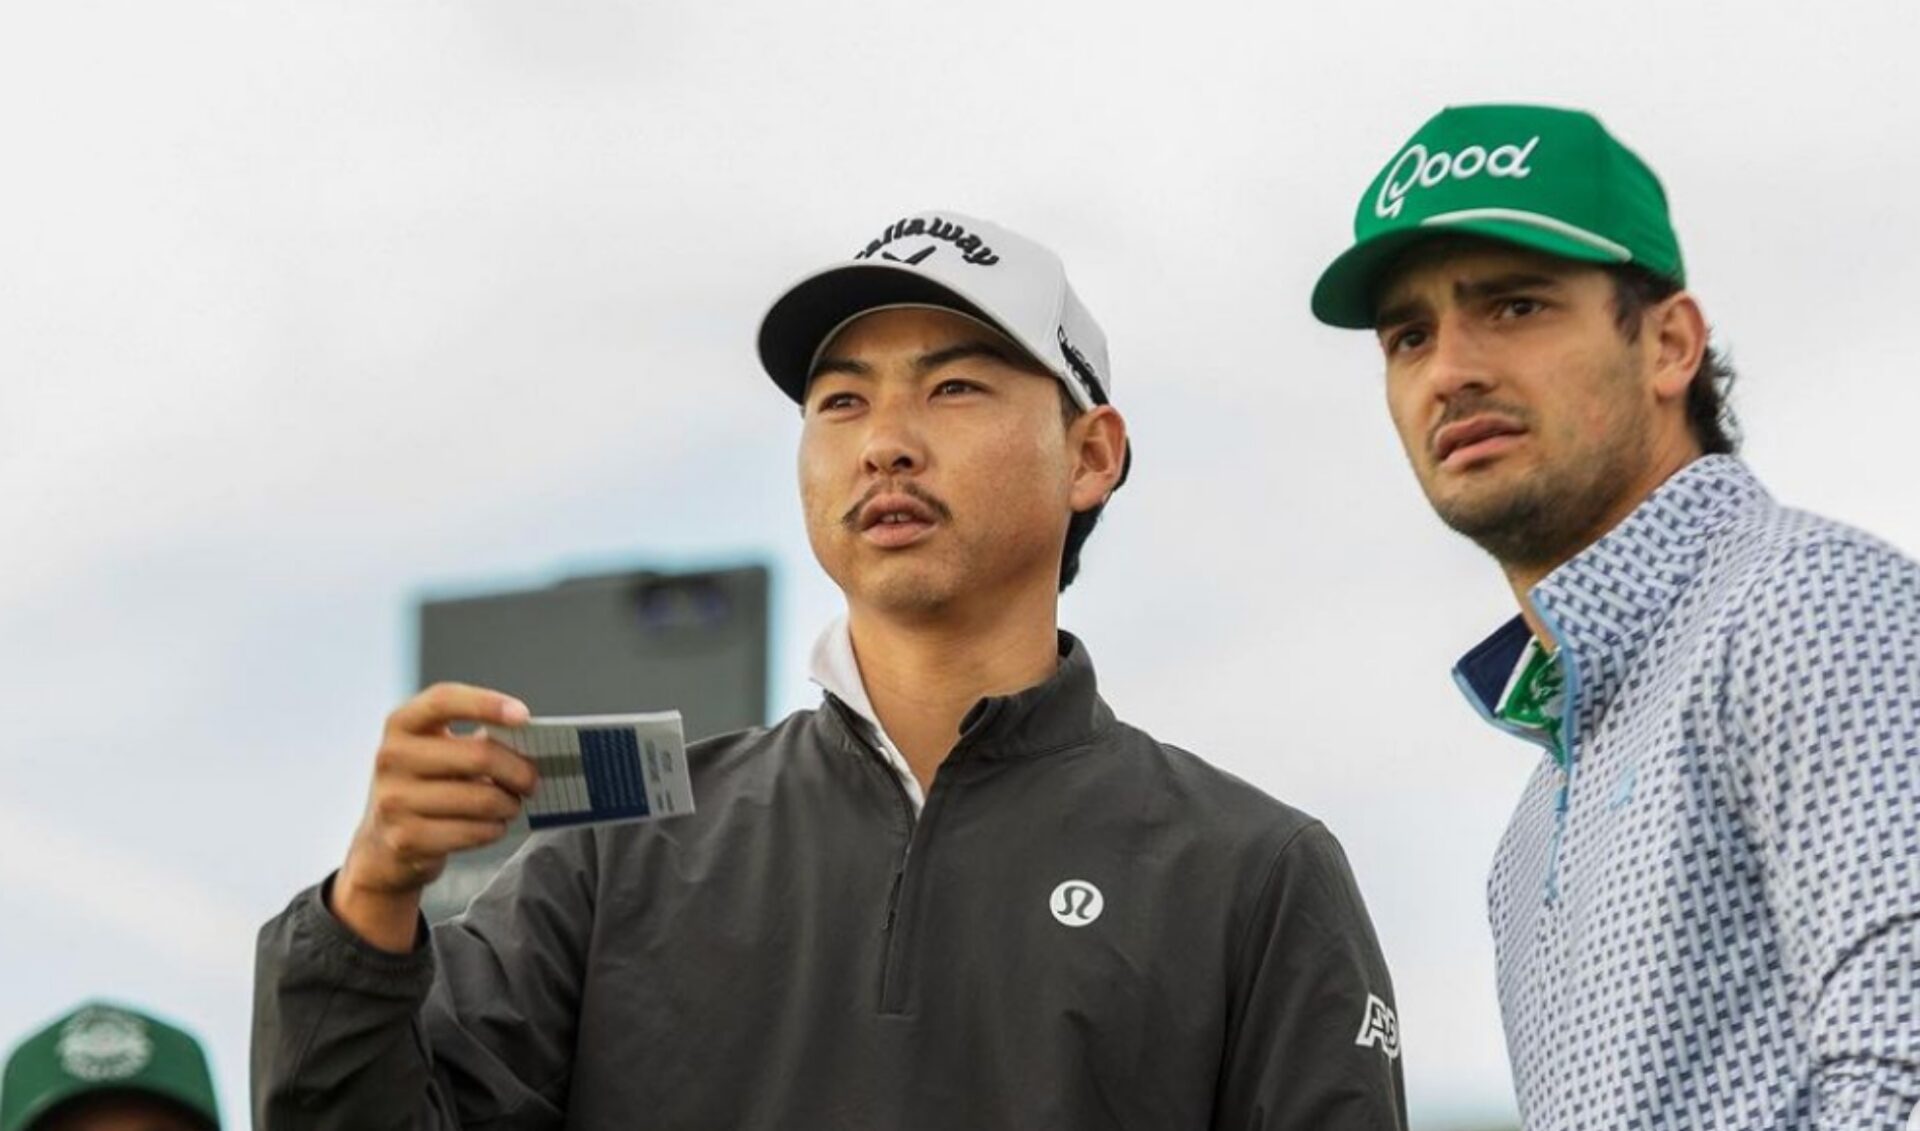 The golfers of Good Good joined the PGA’s Min Woo Lee for a pro-am partnership